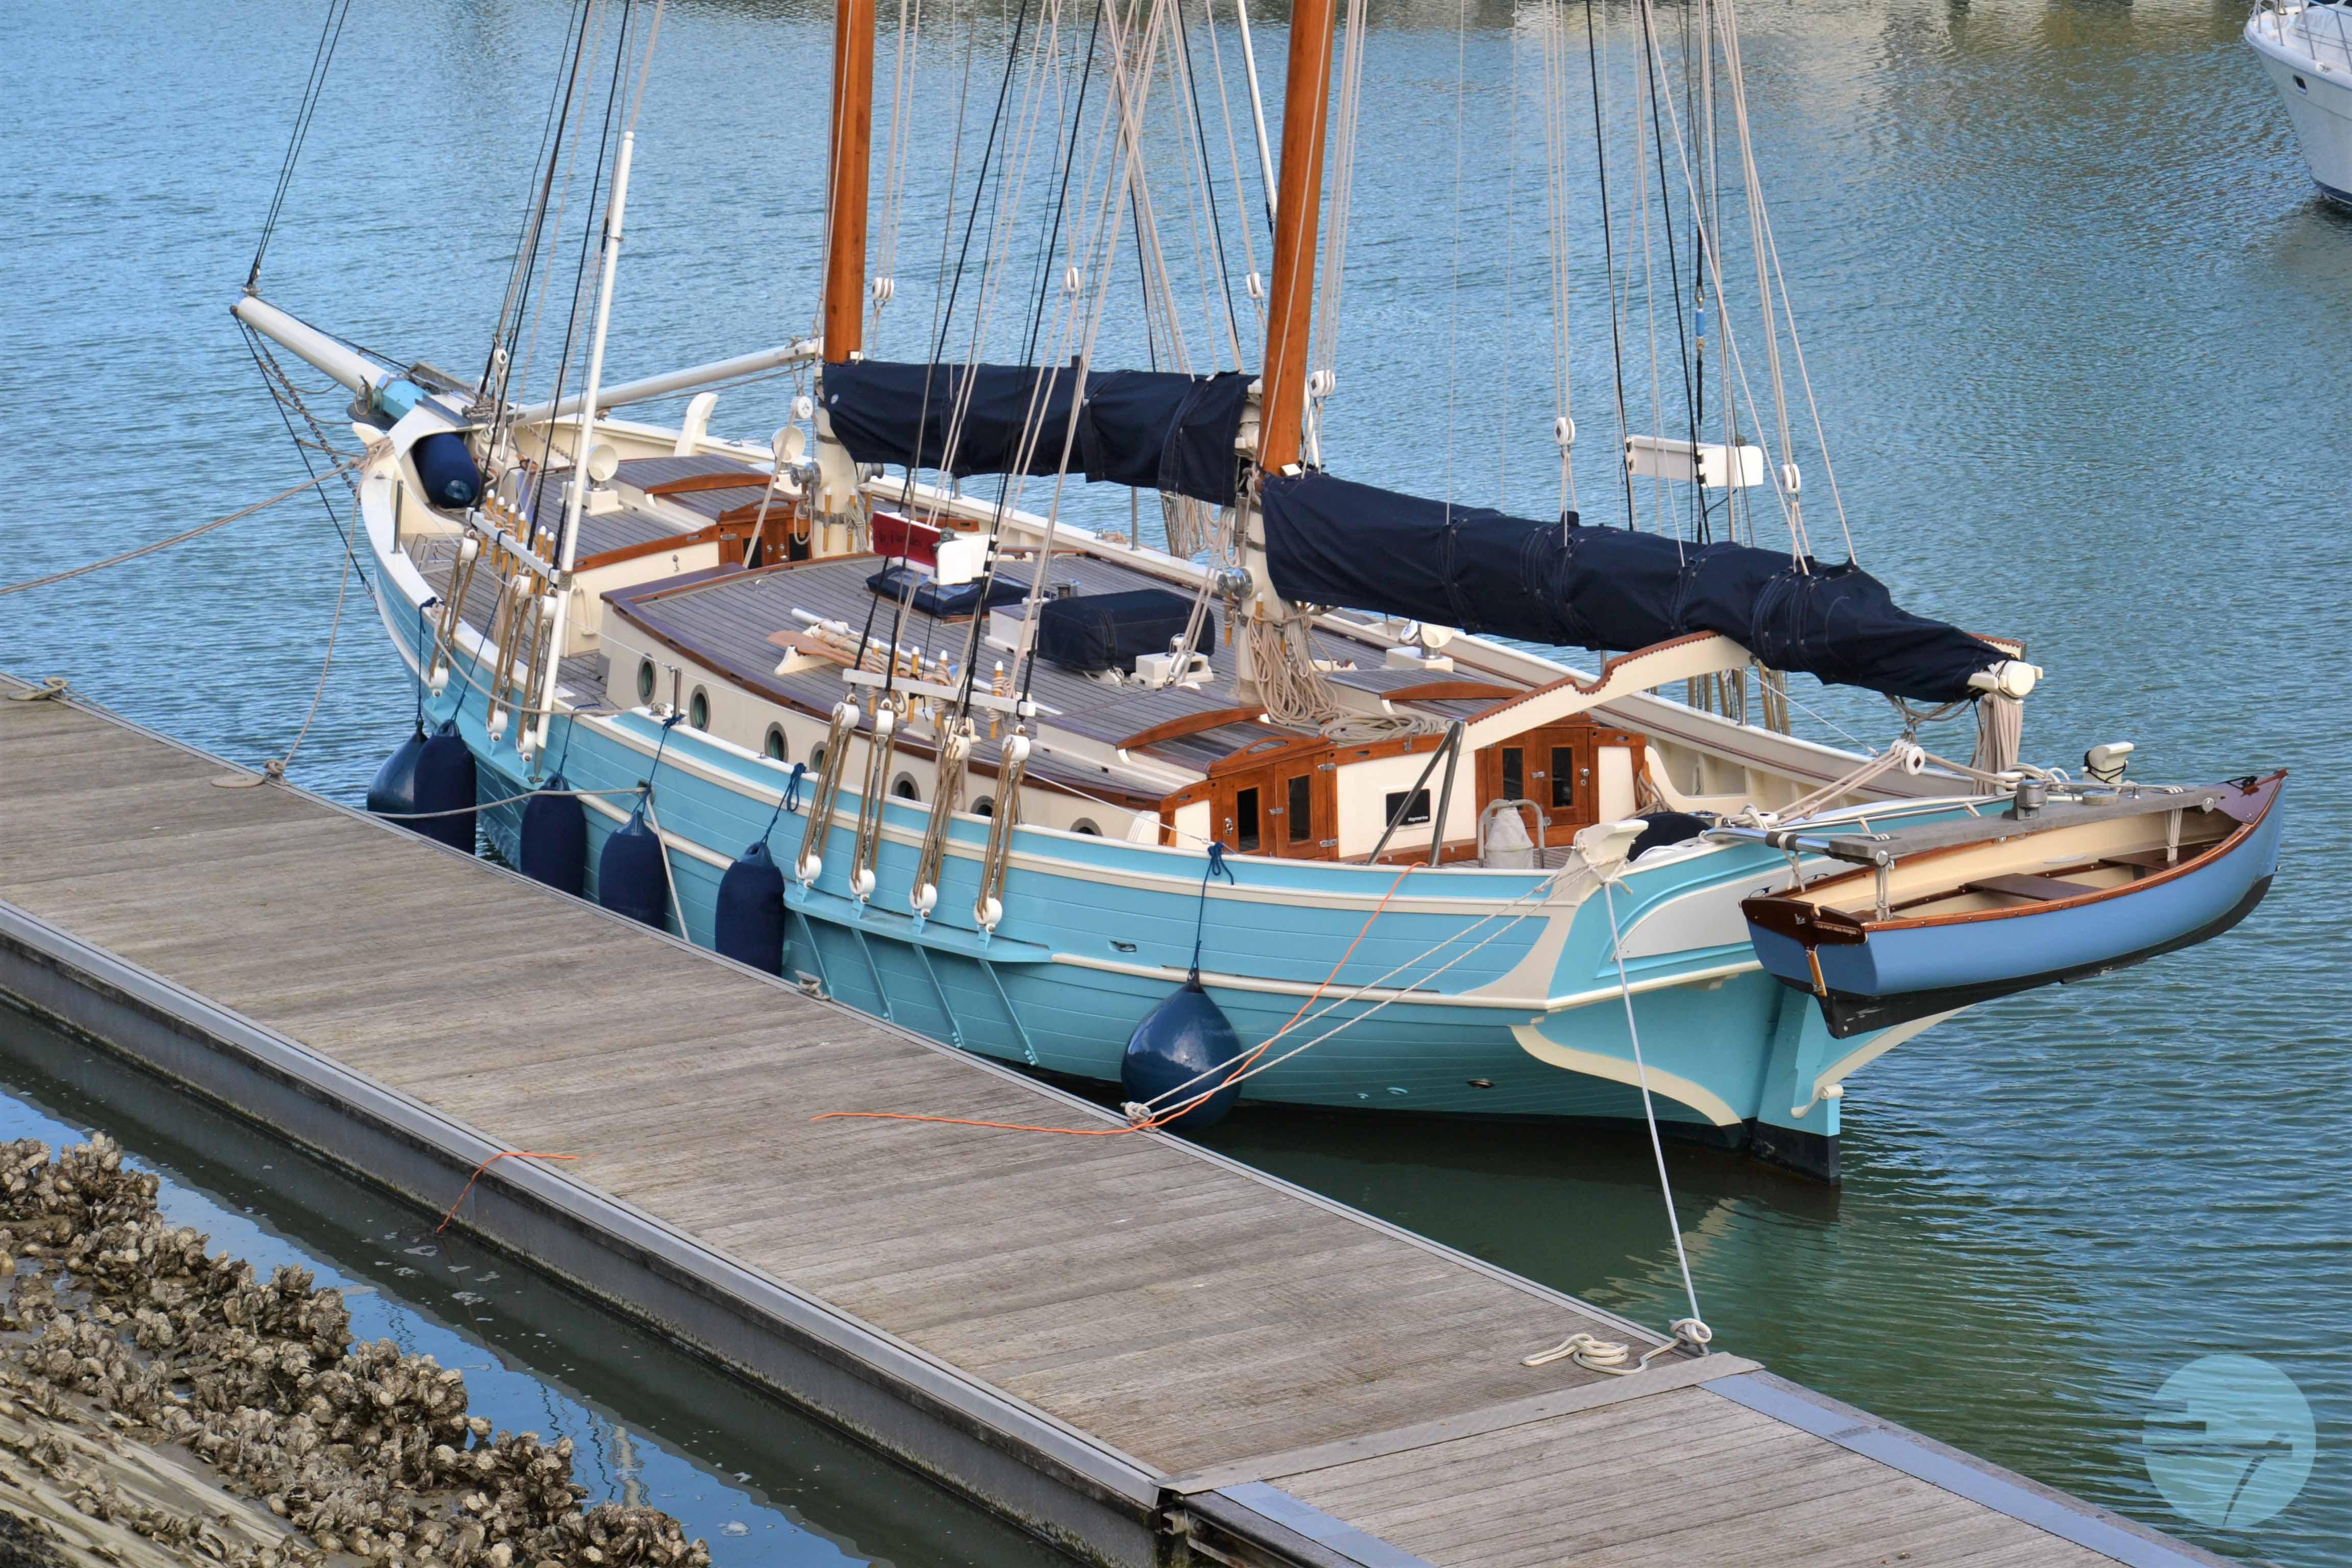 210 sailboats for sale